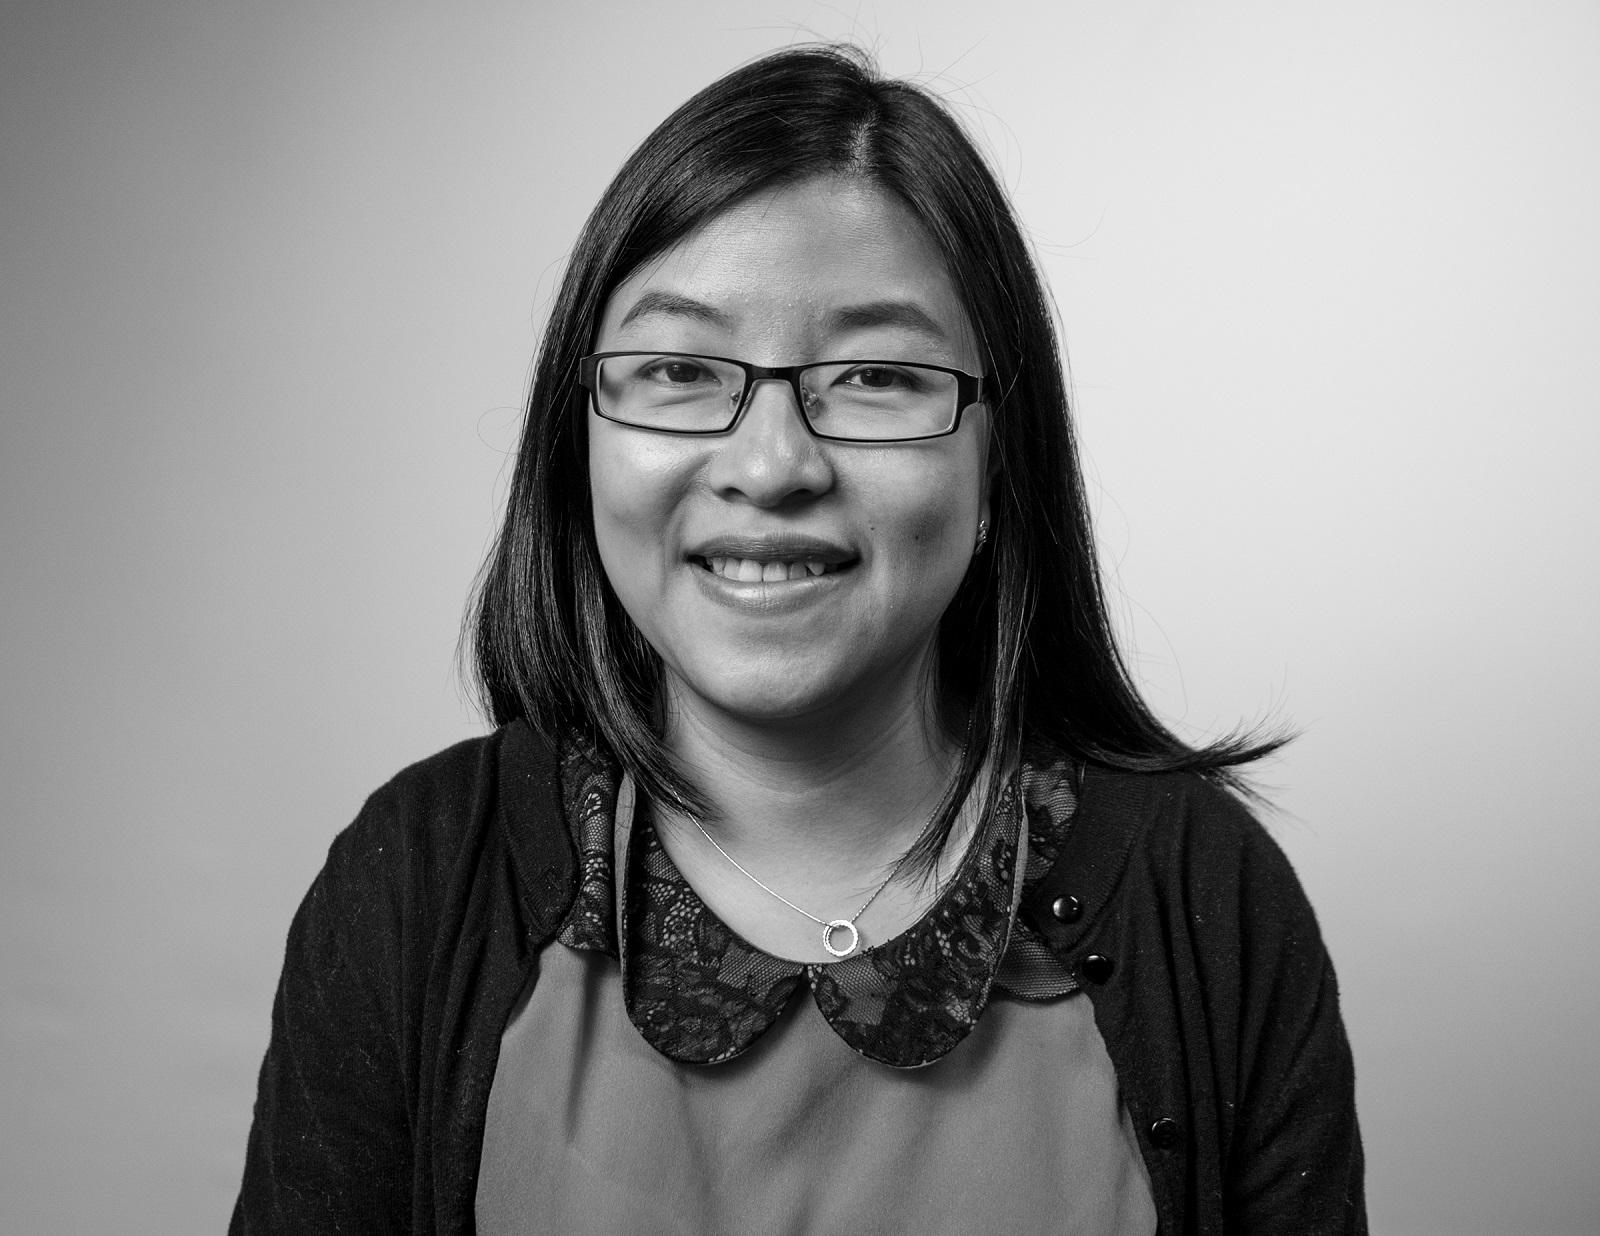 Madeline Diep, researcher at School of Public Health at the University of Maryland 